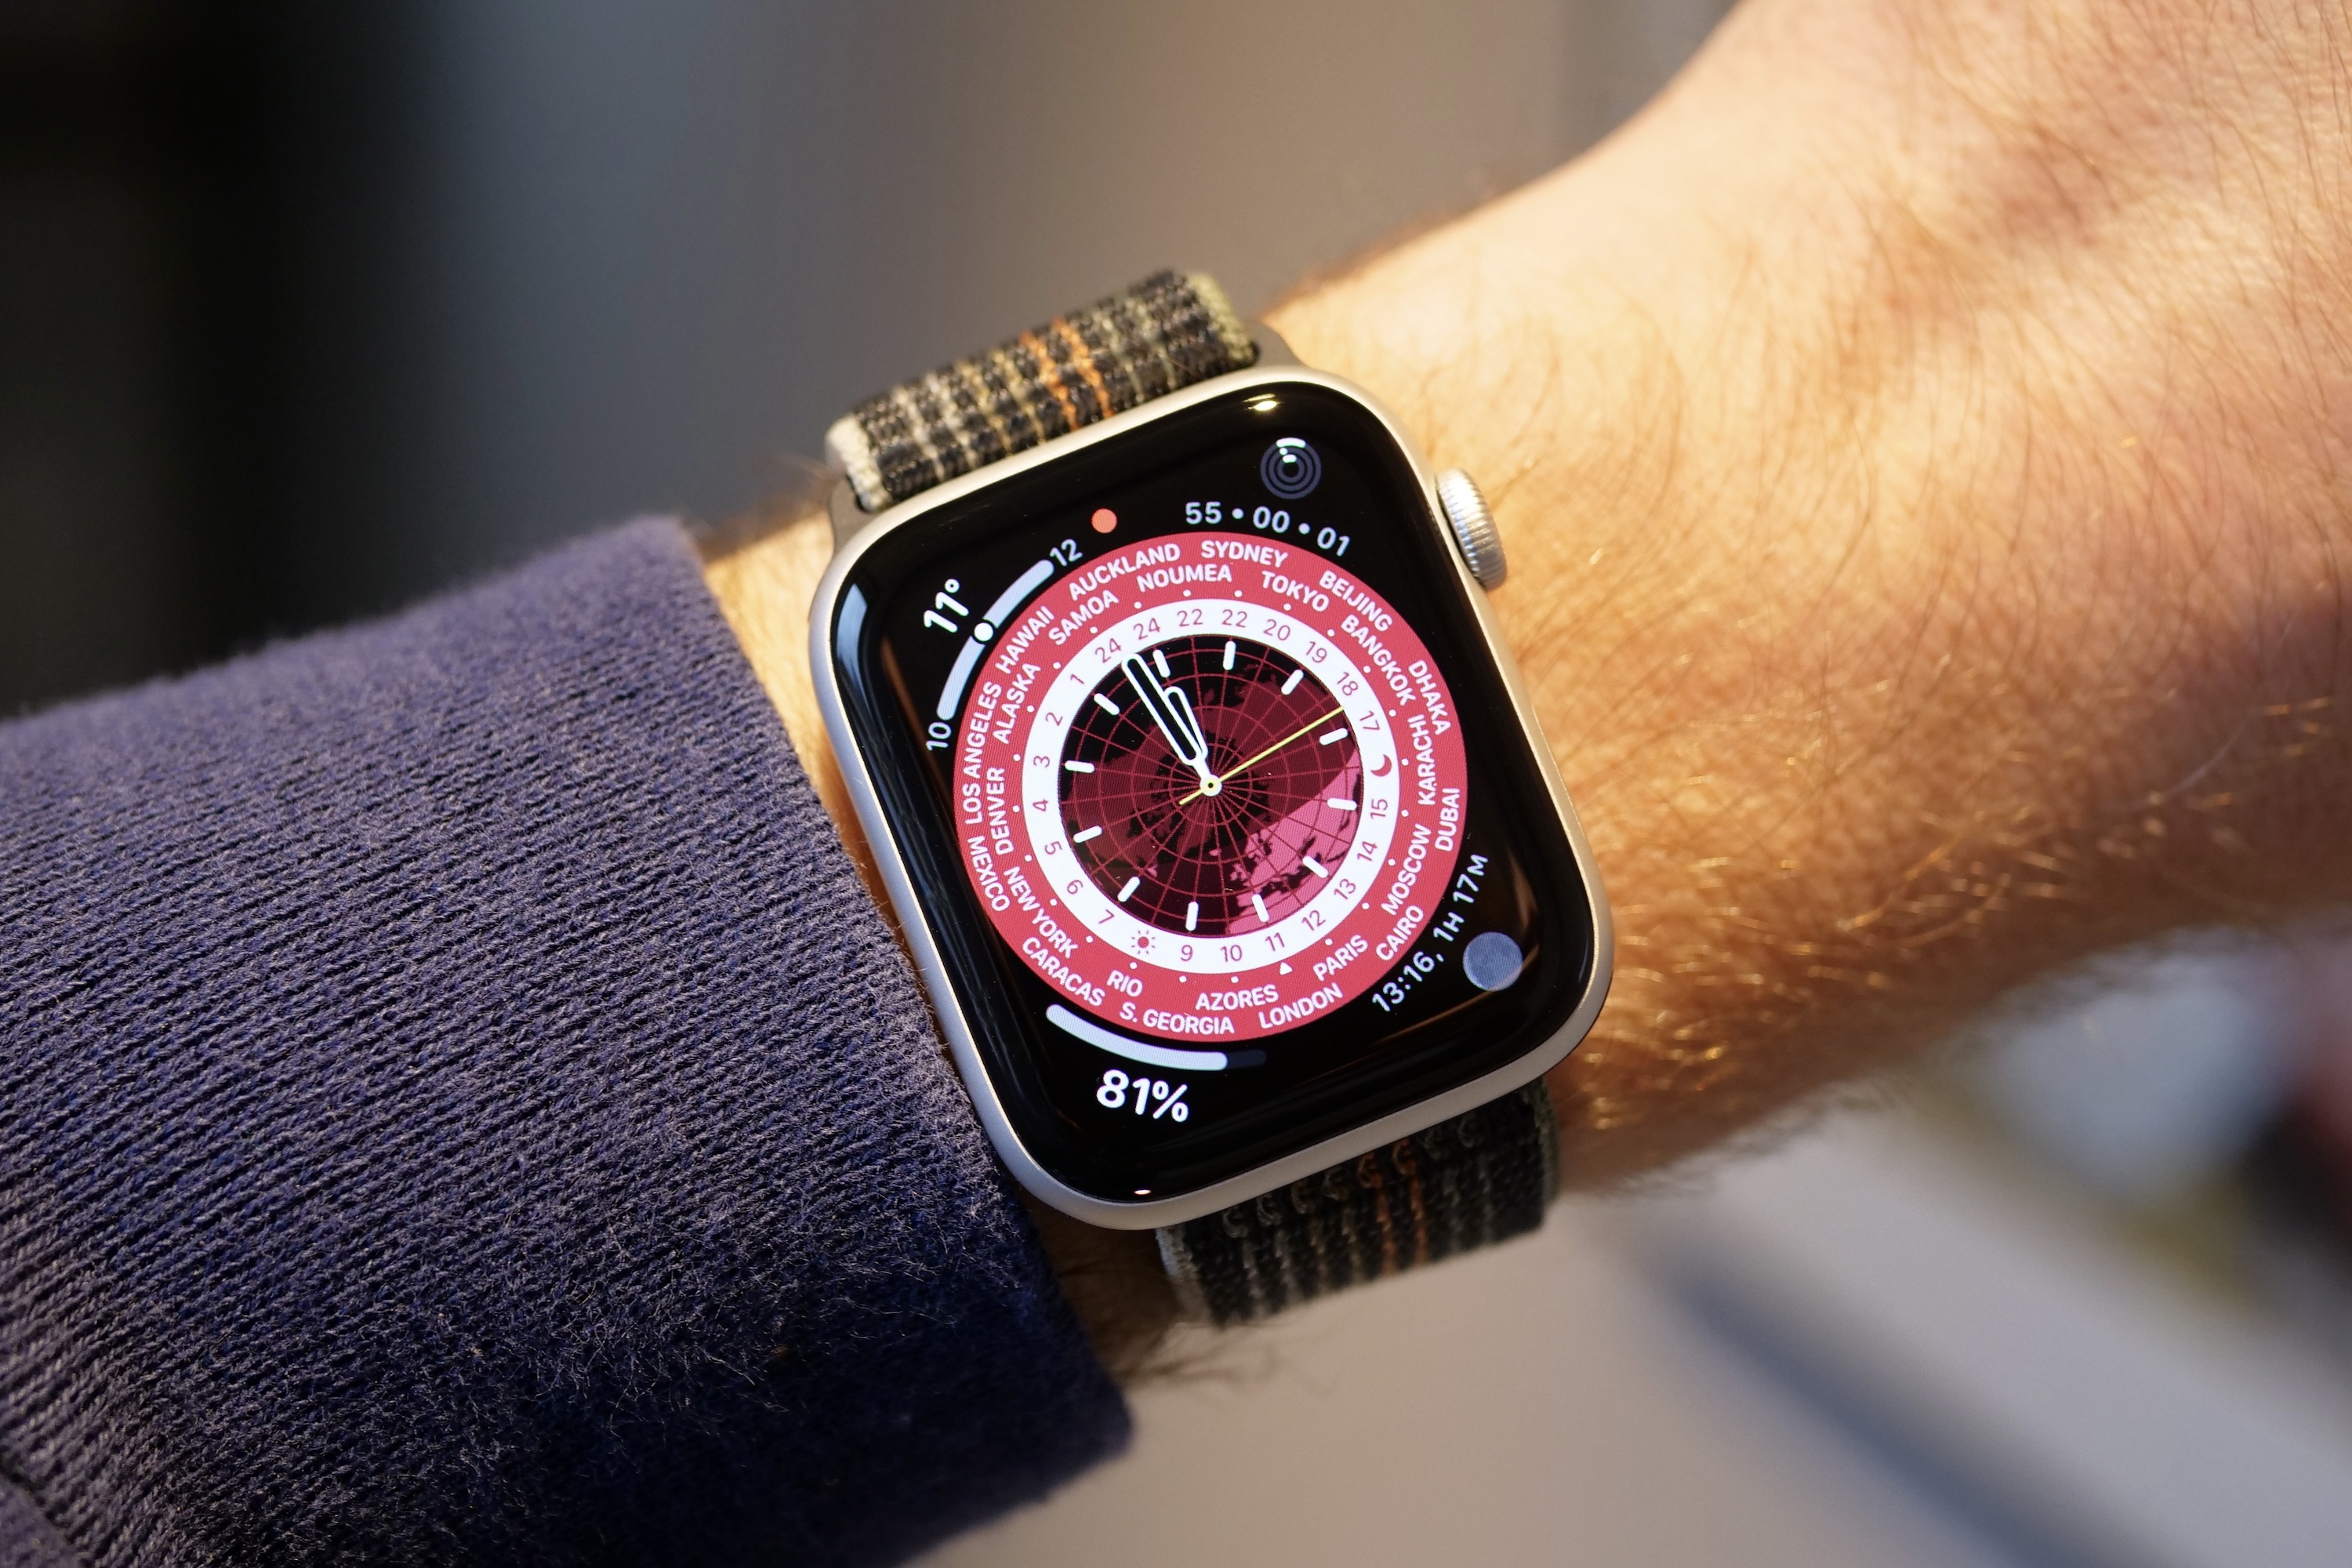 The World Time watch face showing on the Apple Watch SE 2.